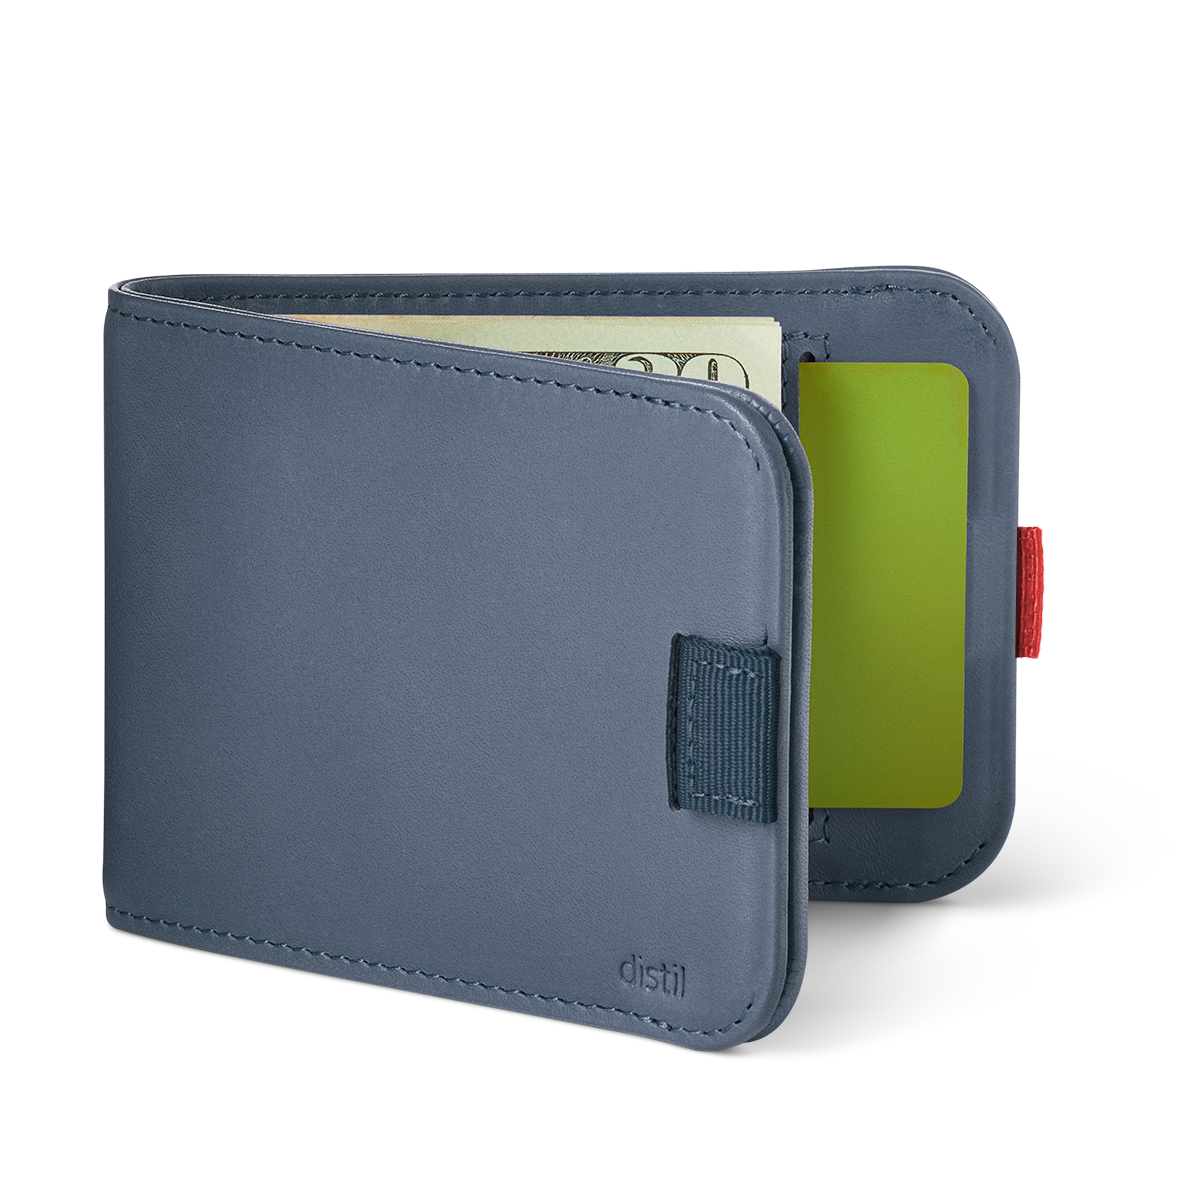 wally bifold 5.0 wallet in navy leather